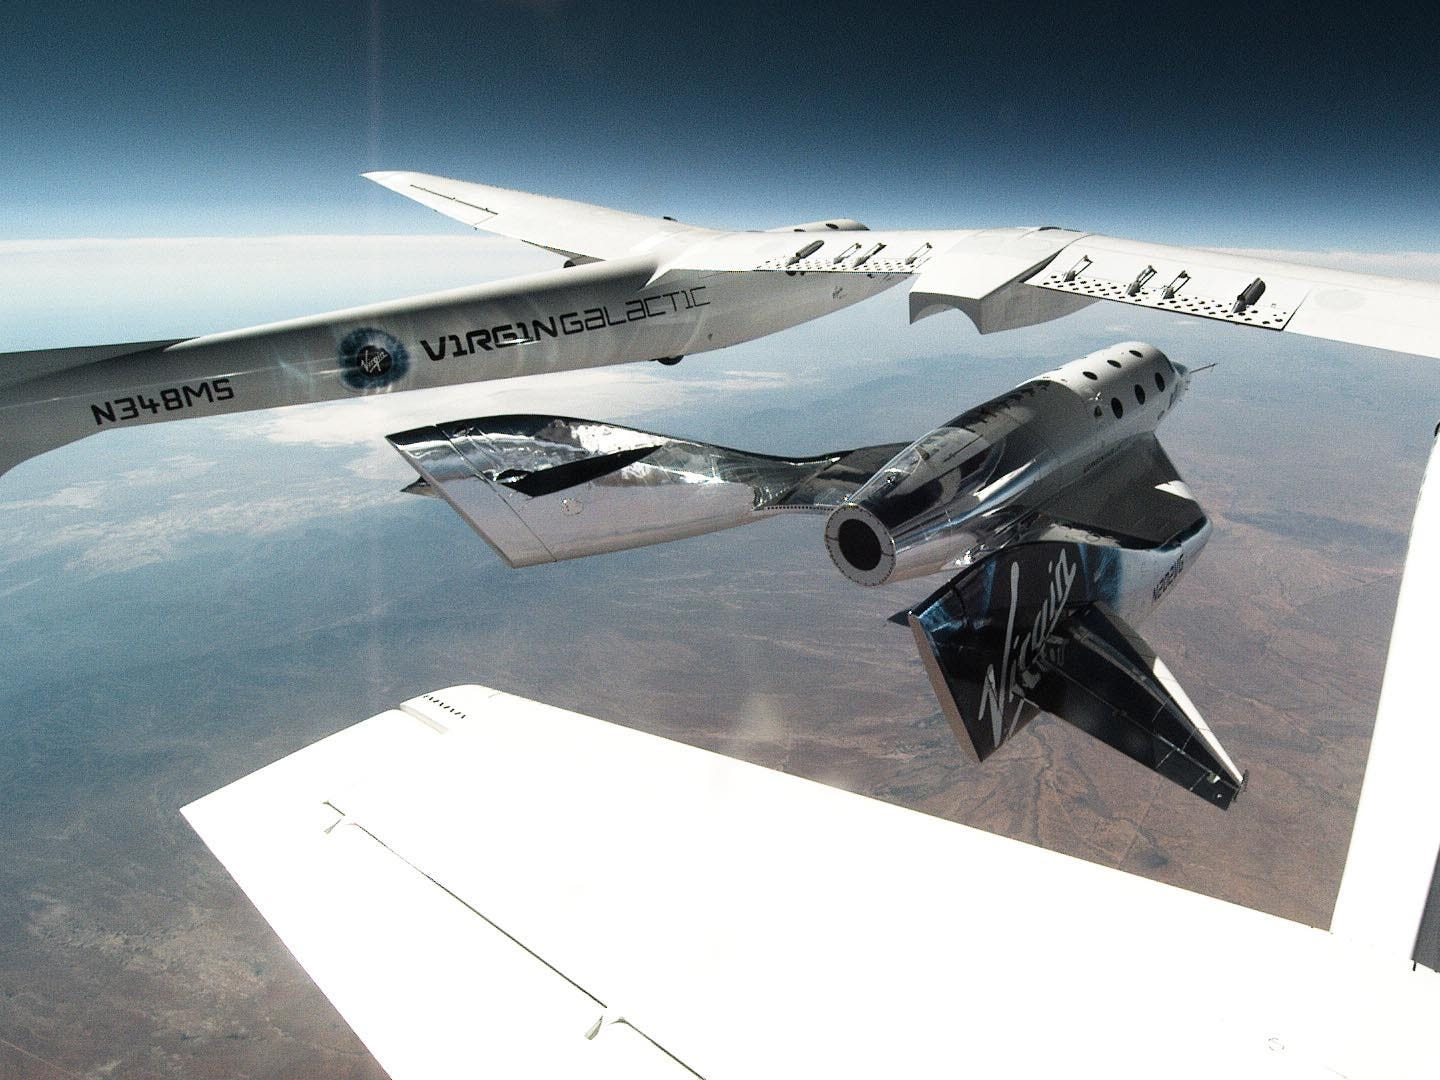 virgin galactic SpaceShipTwo spaceship Unity Released VMS Eve whiteknighttwo aircraft Second Glide Flight New Mexico june 25 2020